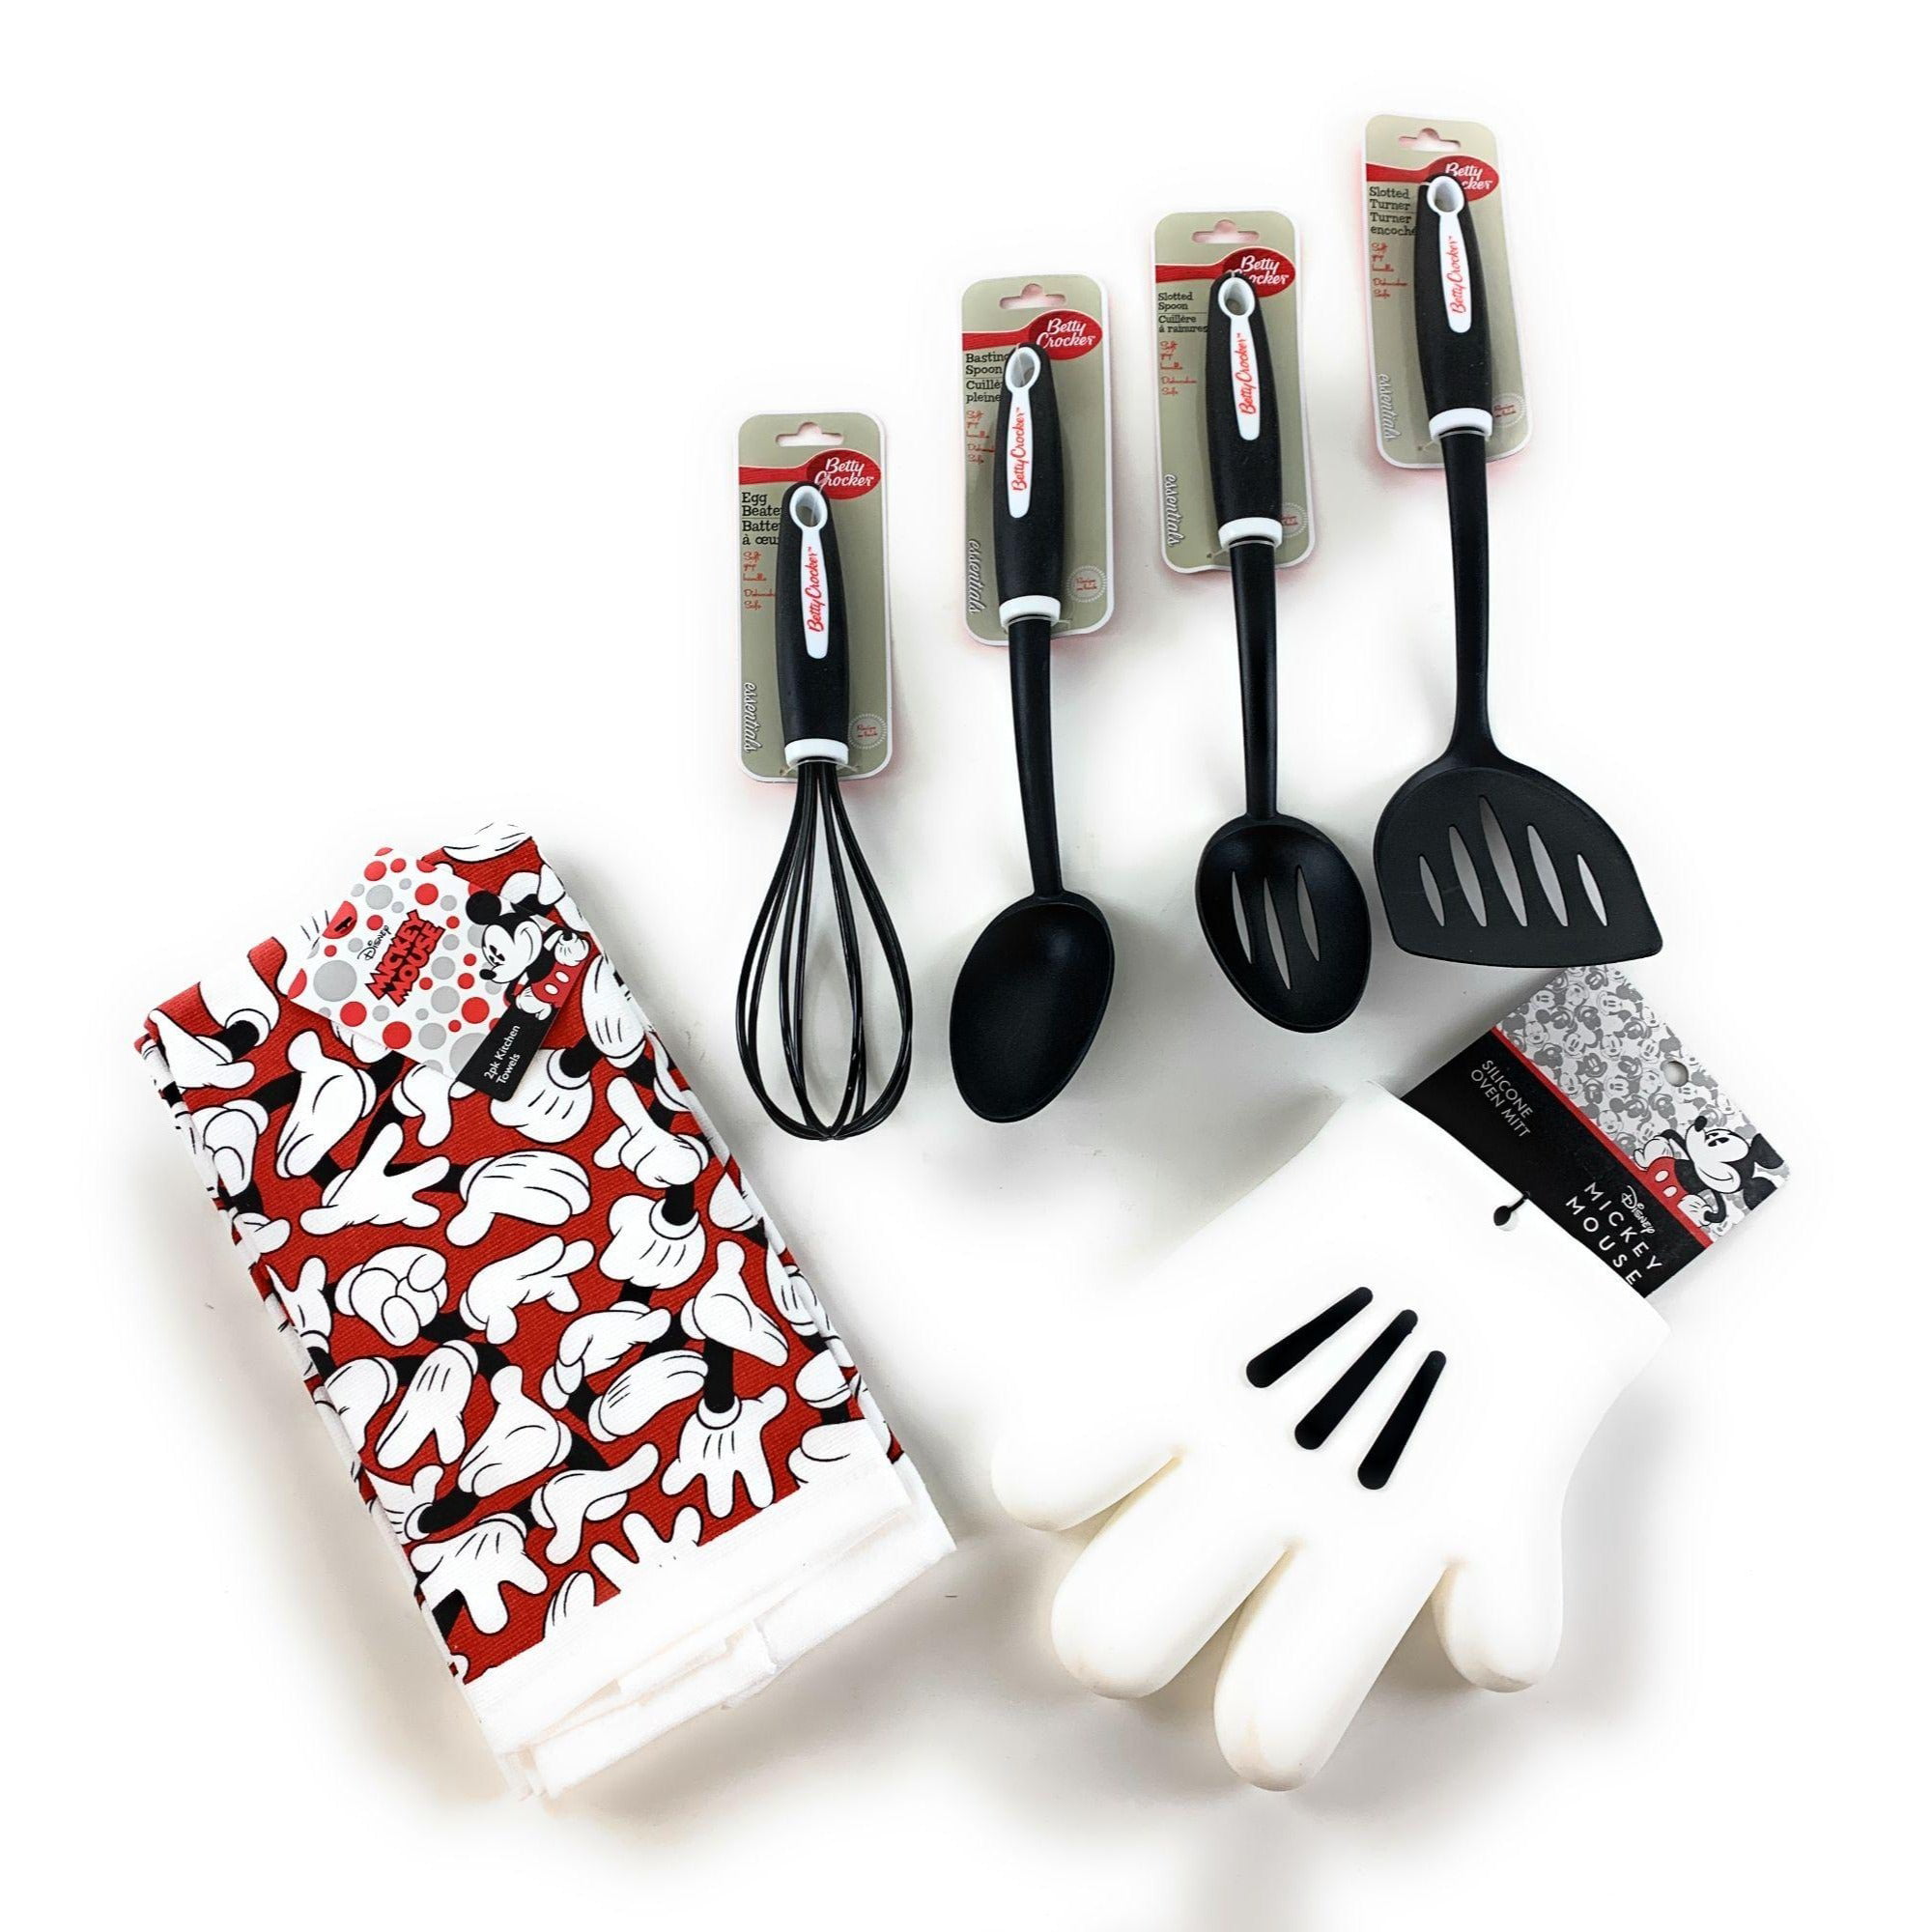 Disney Kitchen Gift Set! Oven Mitts + Potholder + Towel + Cooking Tools!  Minnie Mouse Set with Gift Box! 